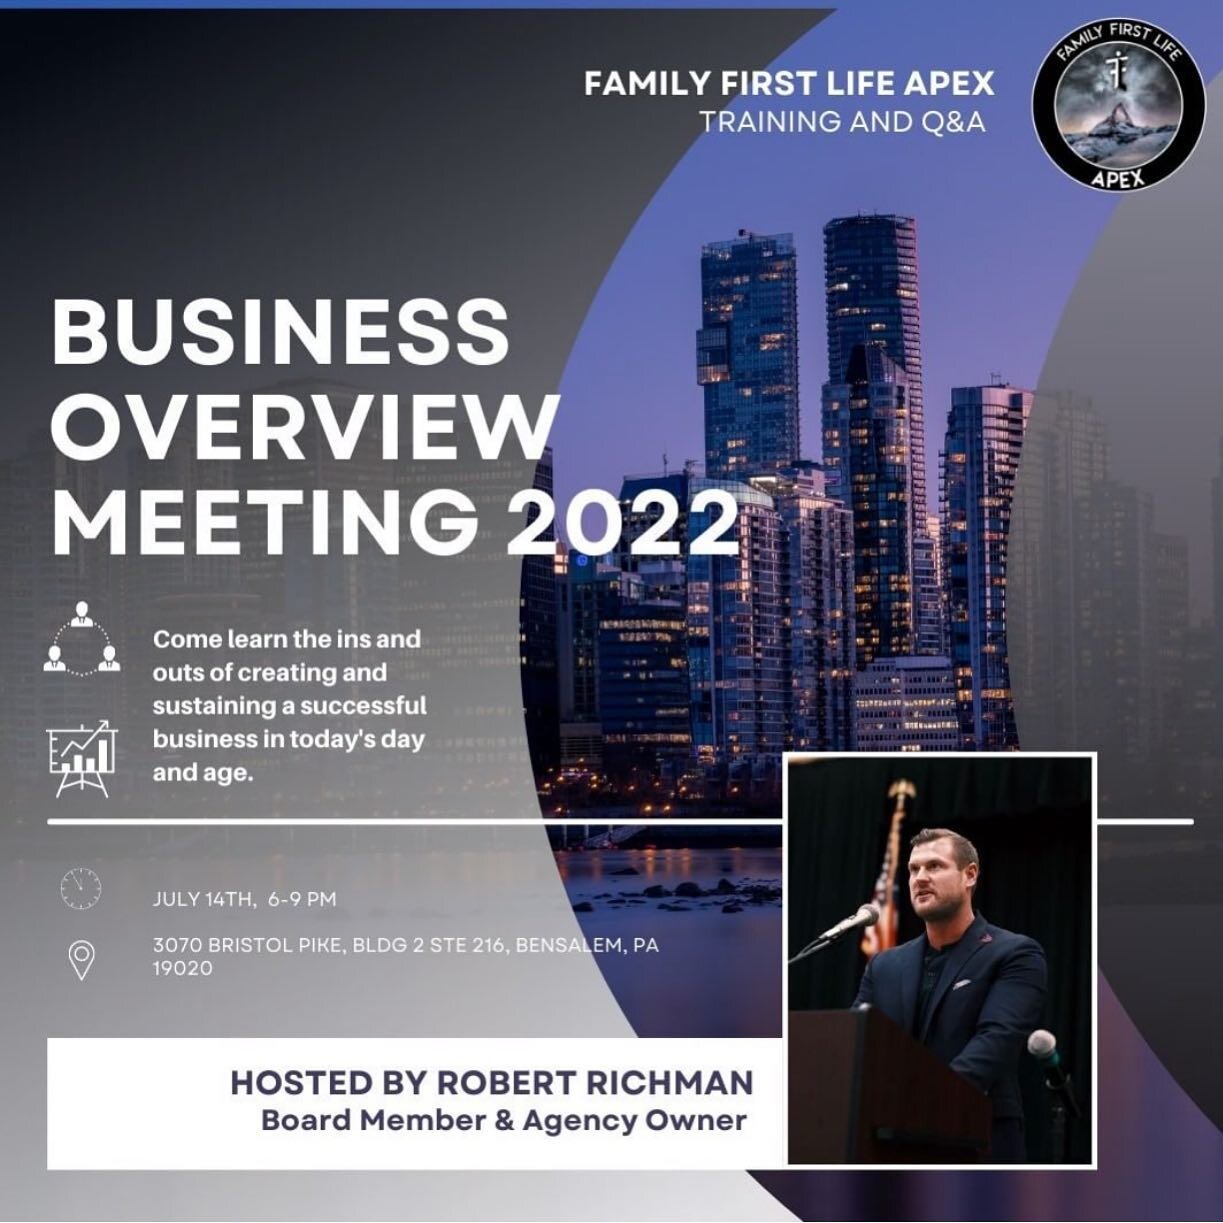 🚨TOMORROW🚨 Come join us tomorrow, July 14th, in Bensalem, PA for our 2022 Business Overview Meeting! Rob Richman, Apex agency owner, will be sharing how you can create and sustain a successful business in today's day and age. Let's go team!💥📈🖊